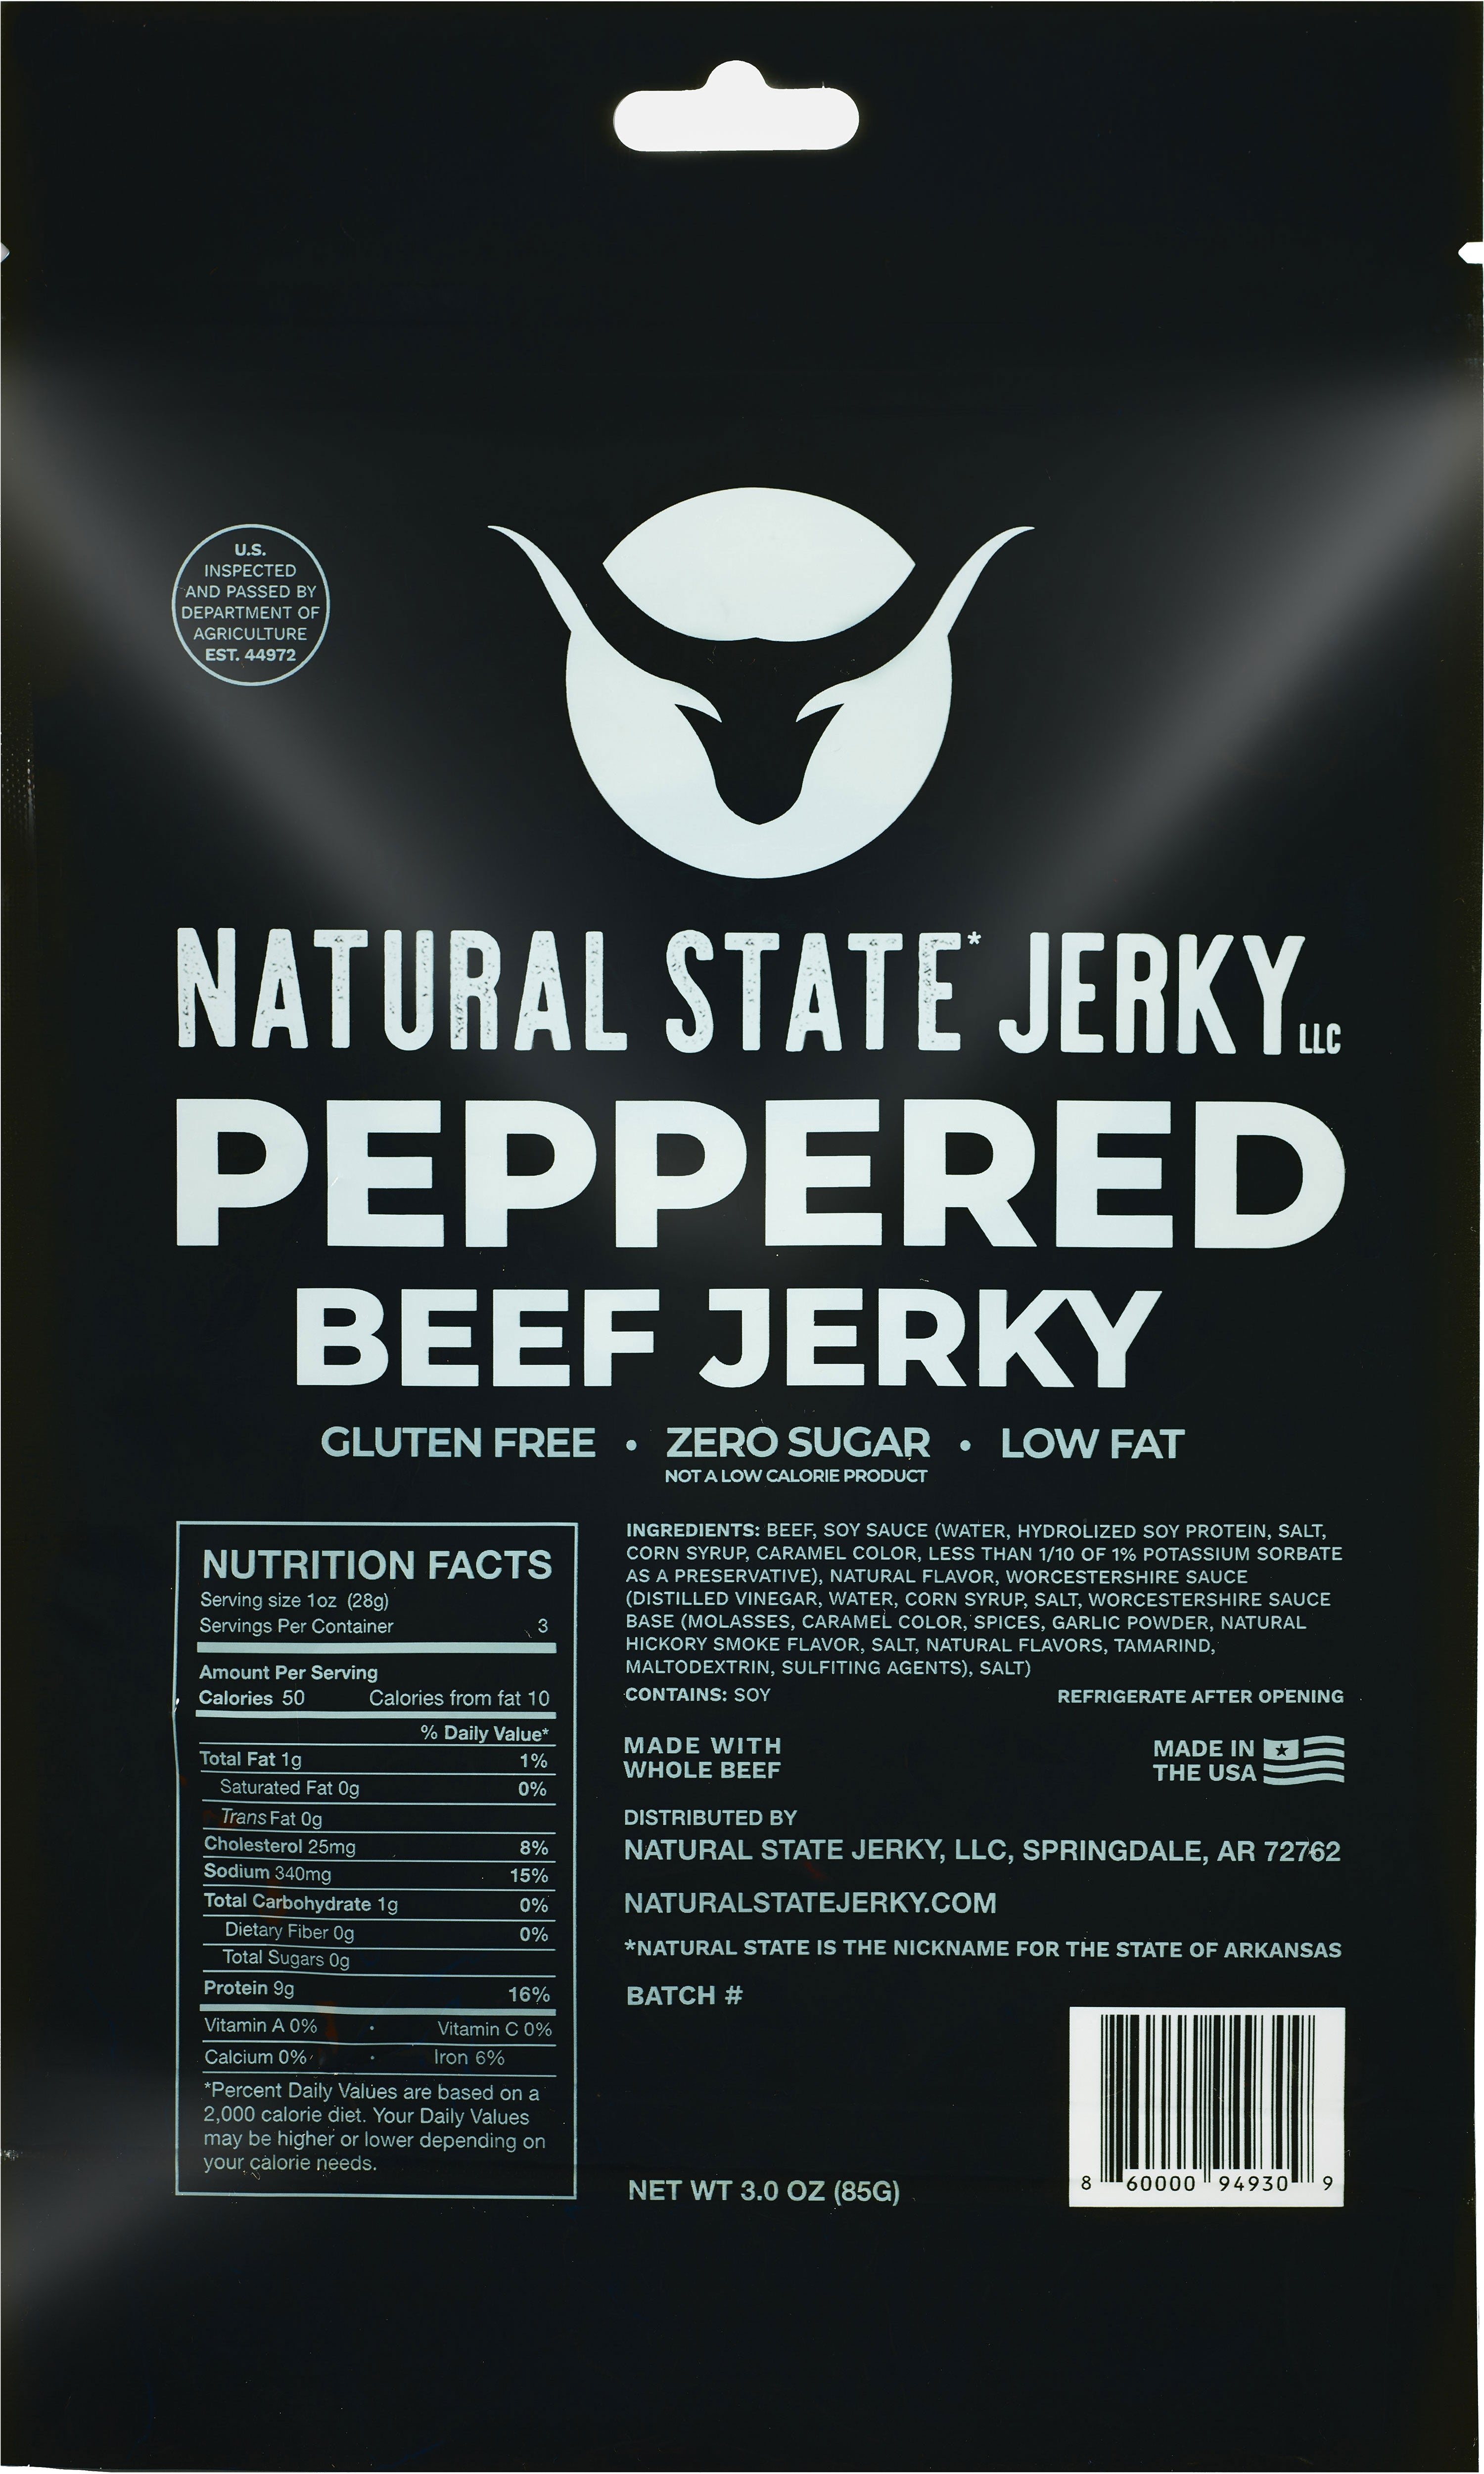 Peppered beef jerky by Natural State Jerky - The Best Jerky in Arkansas - The best Jerky in US